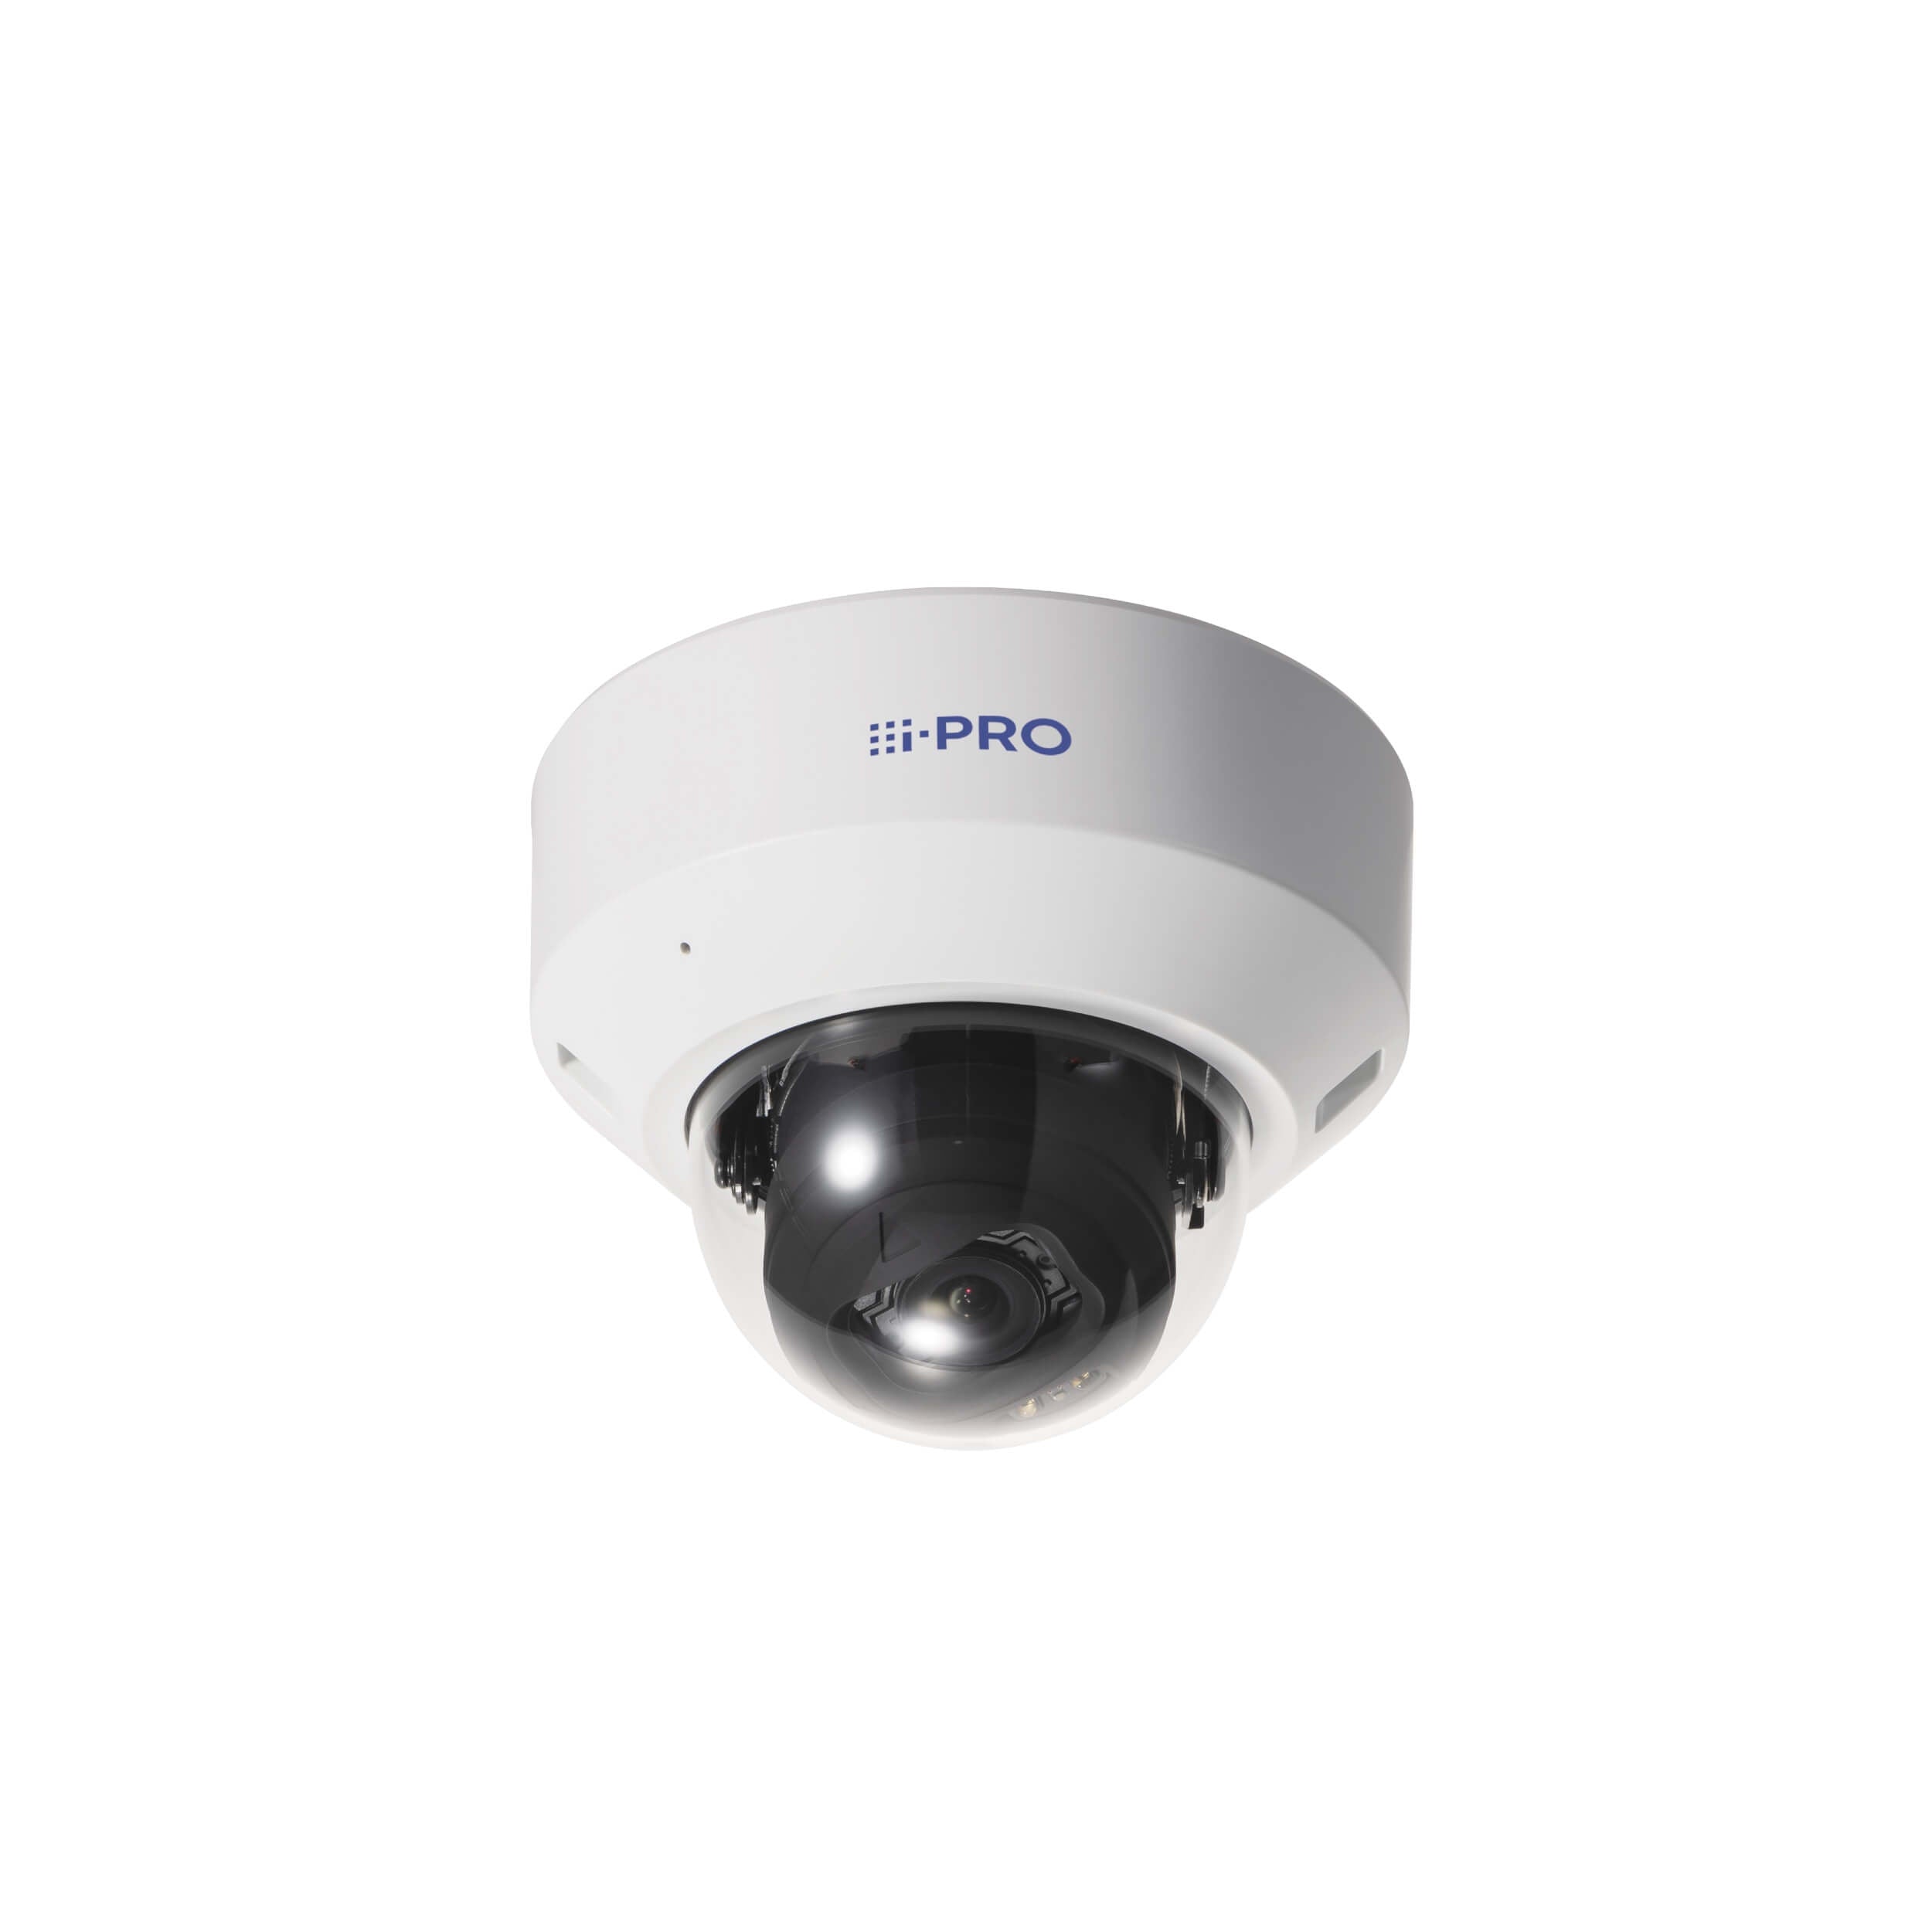 Panasonic WV-S22600-V2L 6MP Vandal Resistant Indoor Dome Network Camera with AI Engine with 4.3-8.6mm Lens